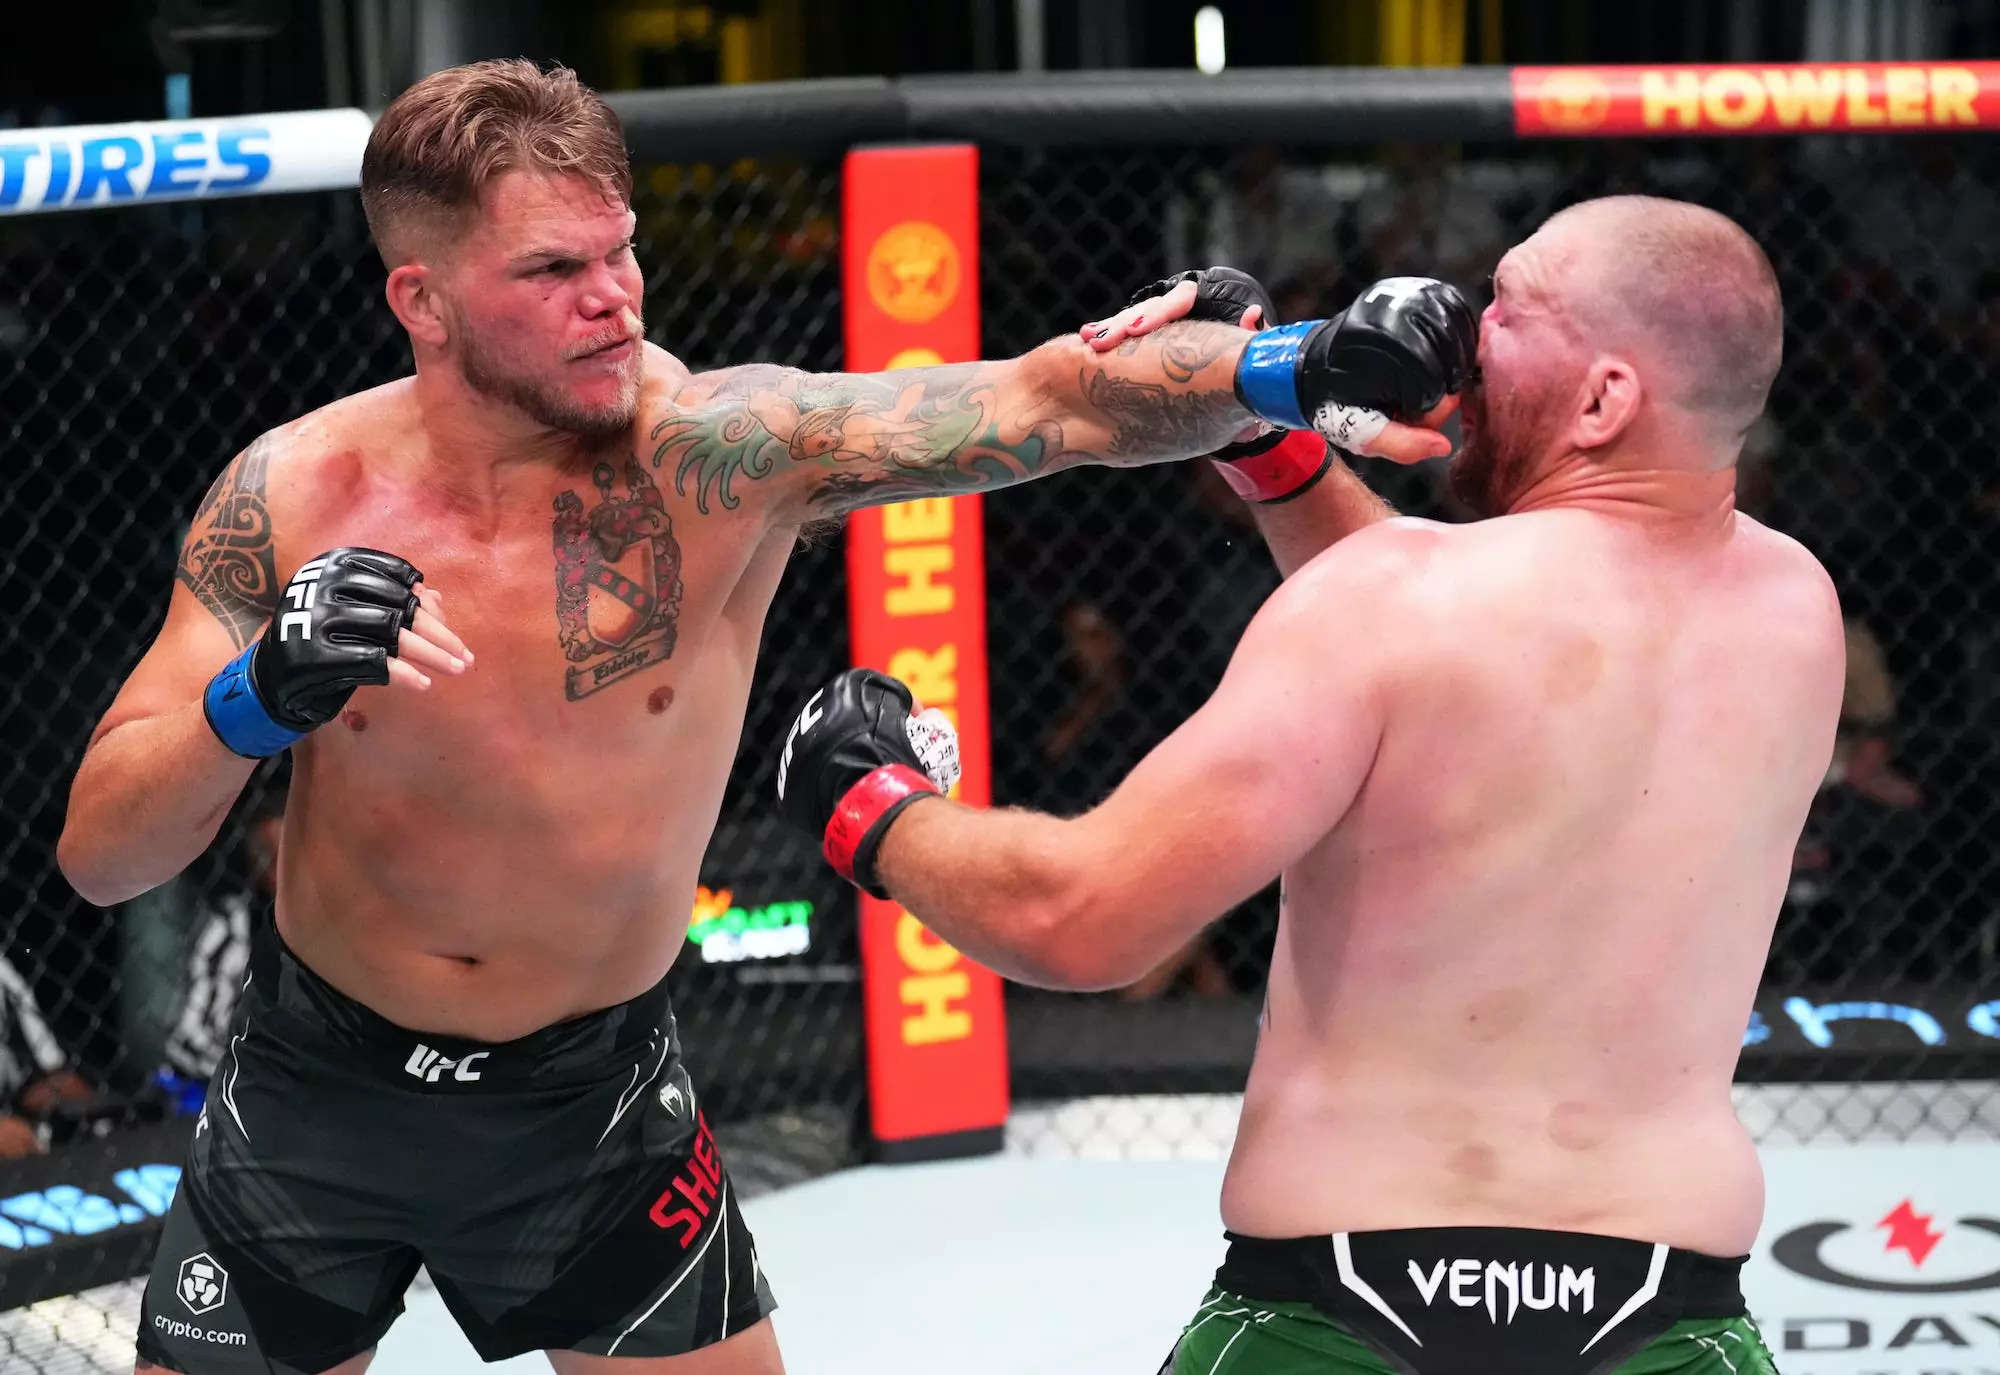 Chase Sherman won his heavyweight fight with a third-round finish.